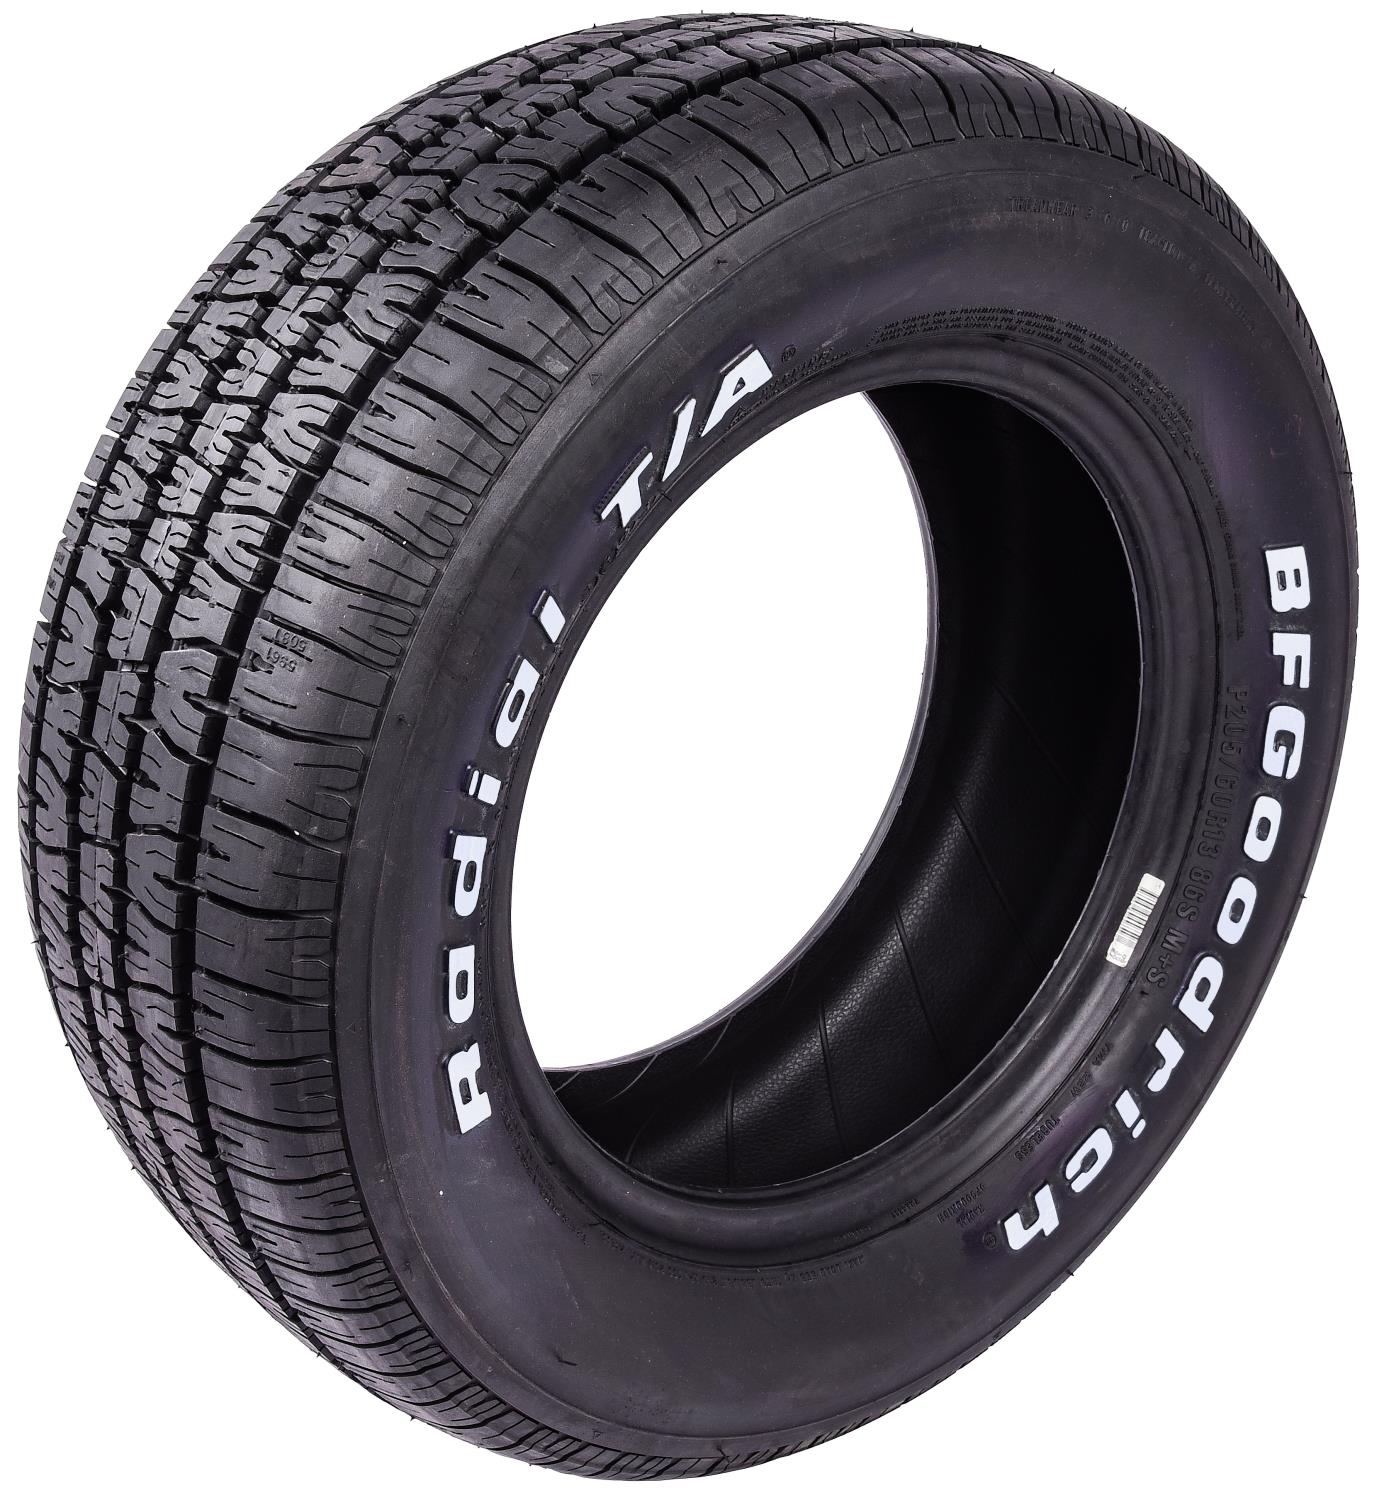 Radial T/A Tire P205/60R13